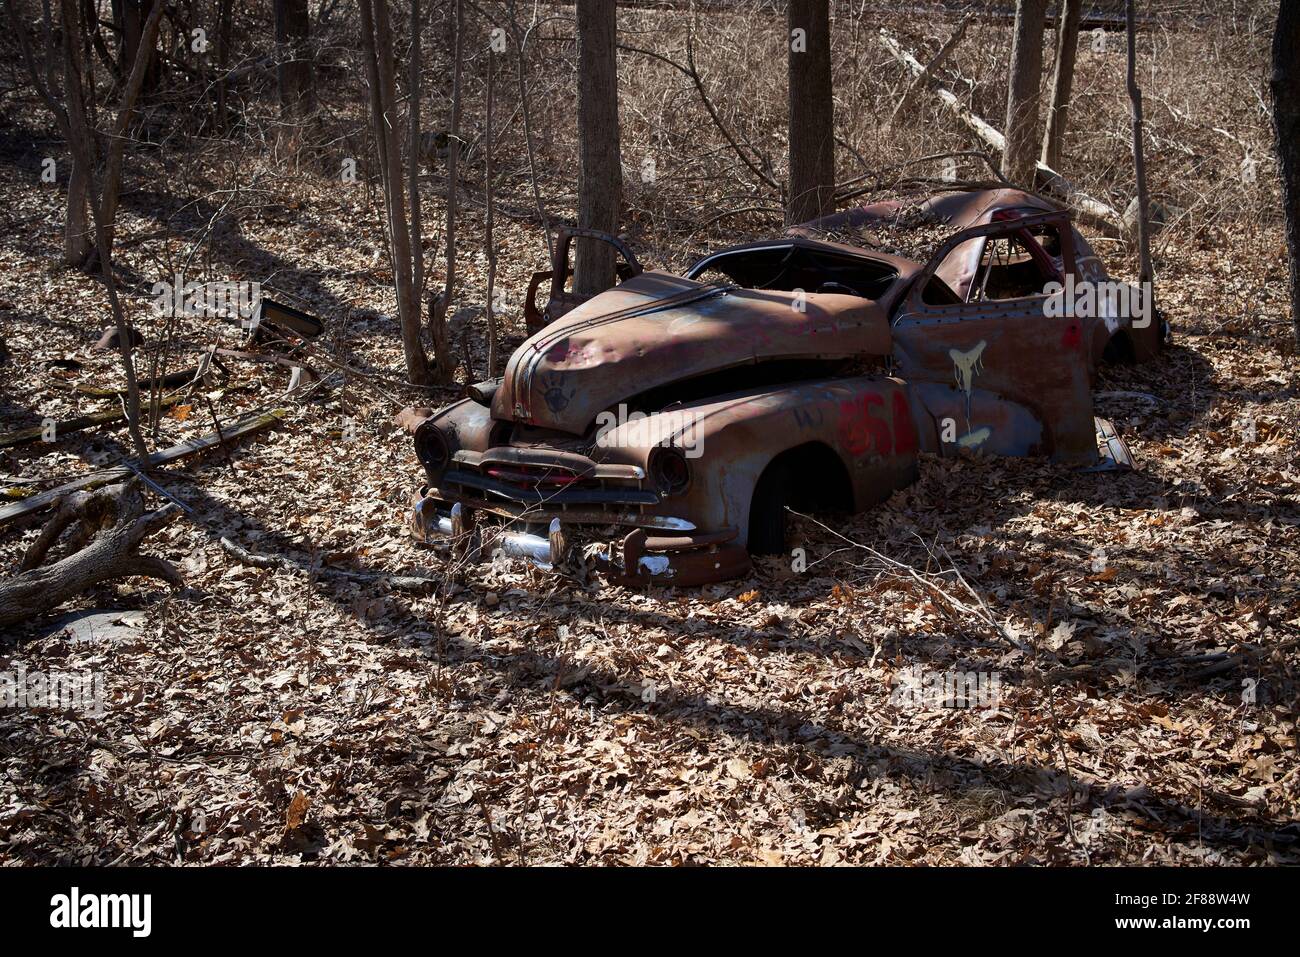 Oldtimer American car wreck abandoned and dumped in the woods. Stock Photo